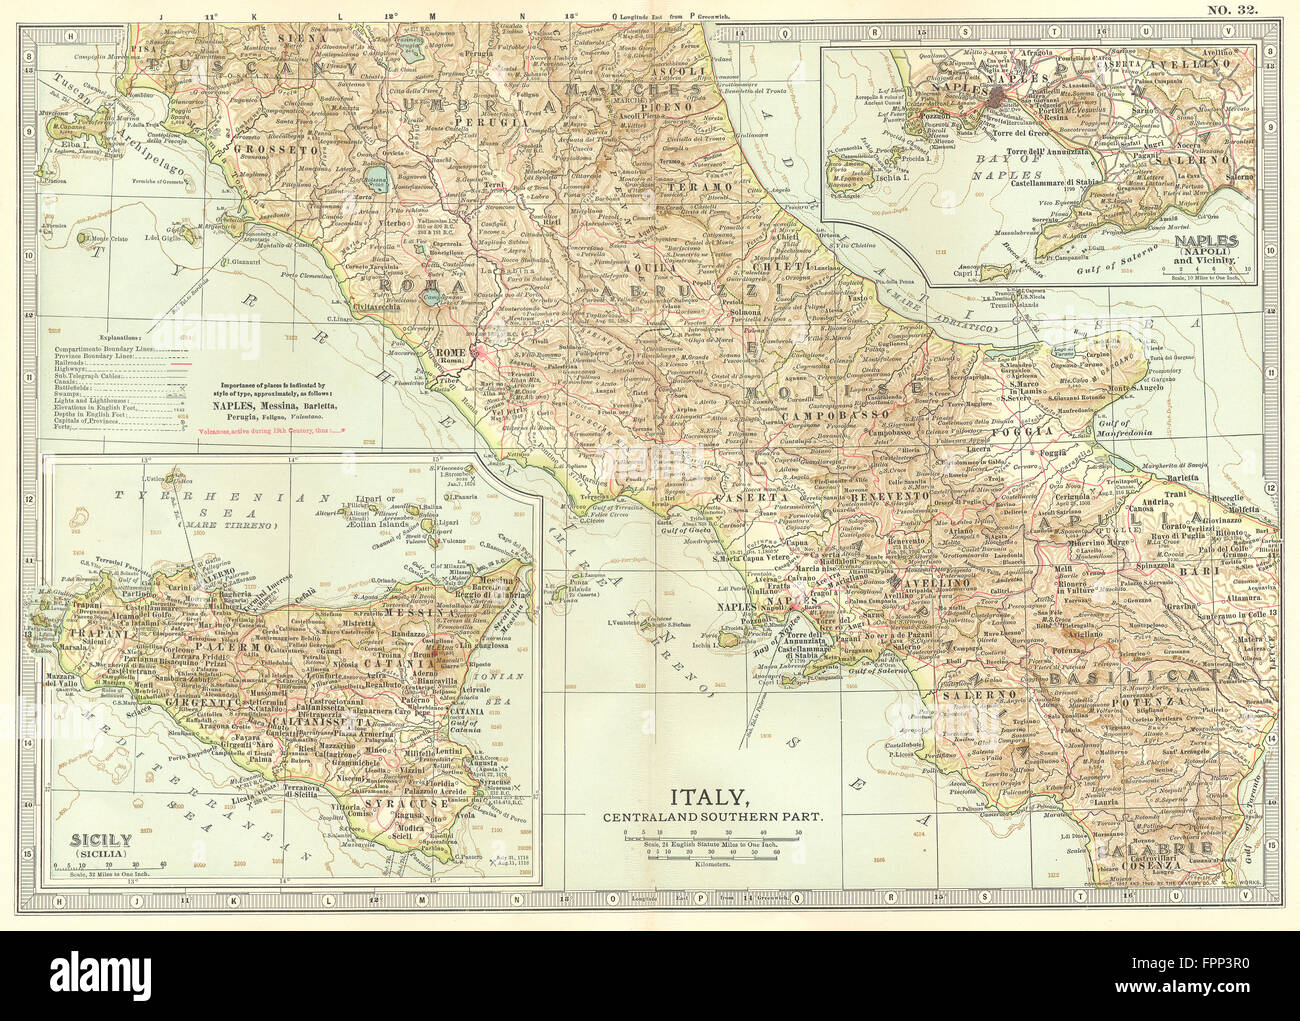 ITALY:Showing 1000 Expedition/Guelphs Ghibellines &c battlefields, 1903 map Stock Photo